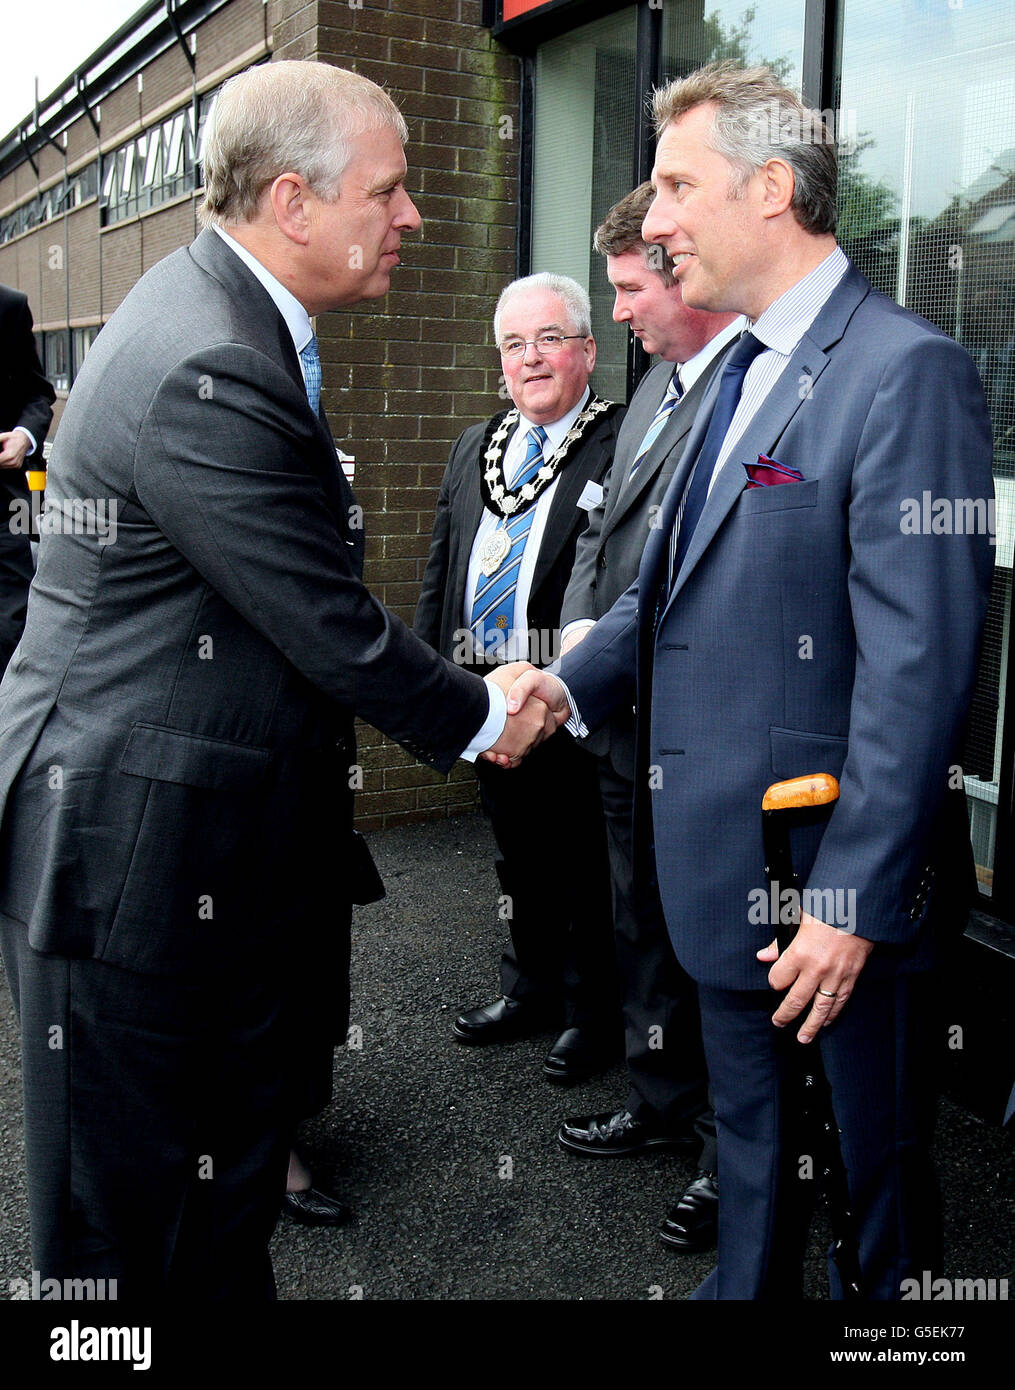 The Duke of York, Prince Andrew, is welcomed to the Northern Regional College in Ballymena, Co Antrim by Ian Paisley Jnr, MP for the area, where he presented him with a North Antrim Blackthorn stick. Stock Photo